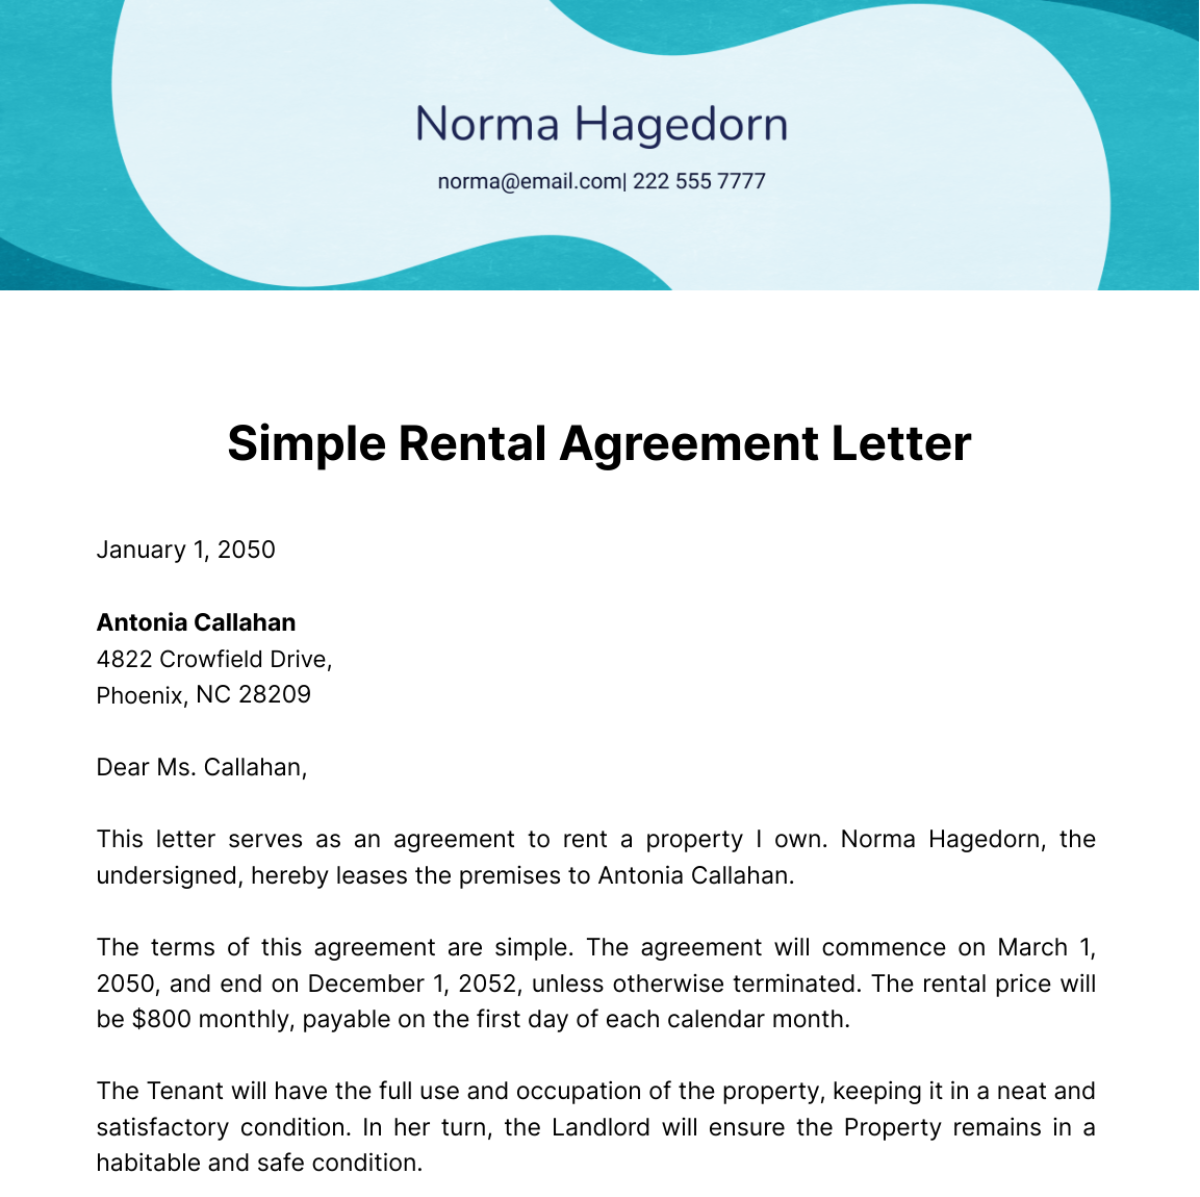 Simple Rental Agreement Letter  Template